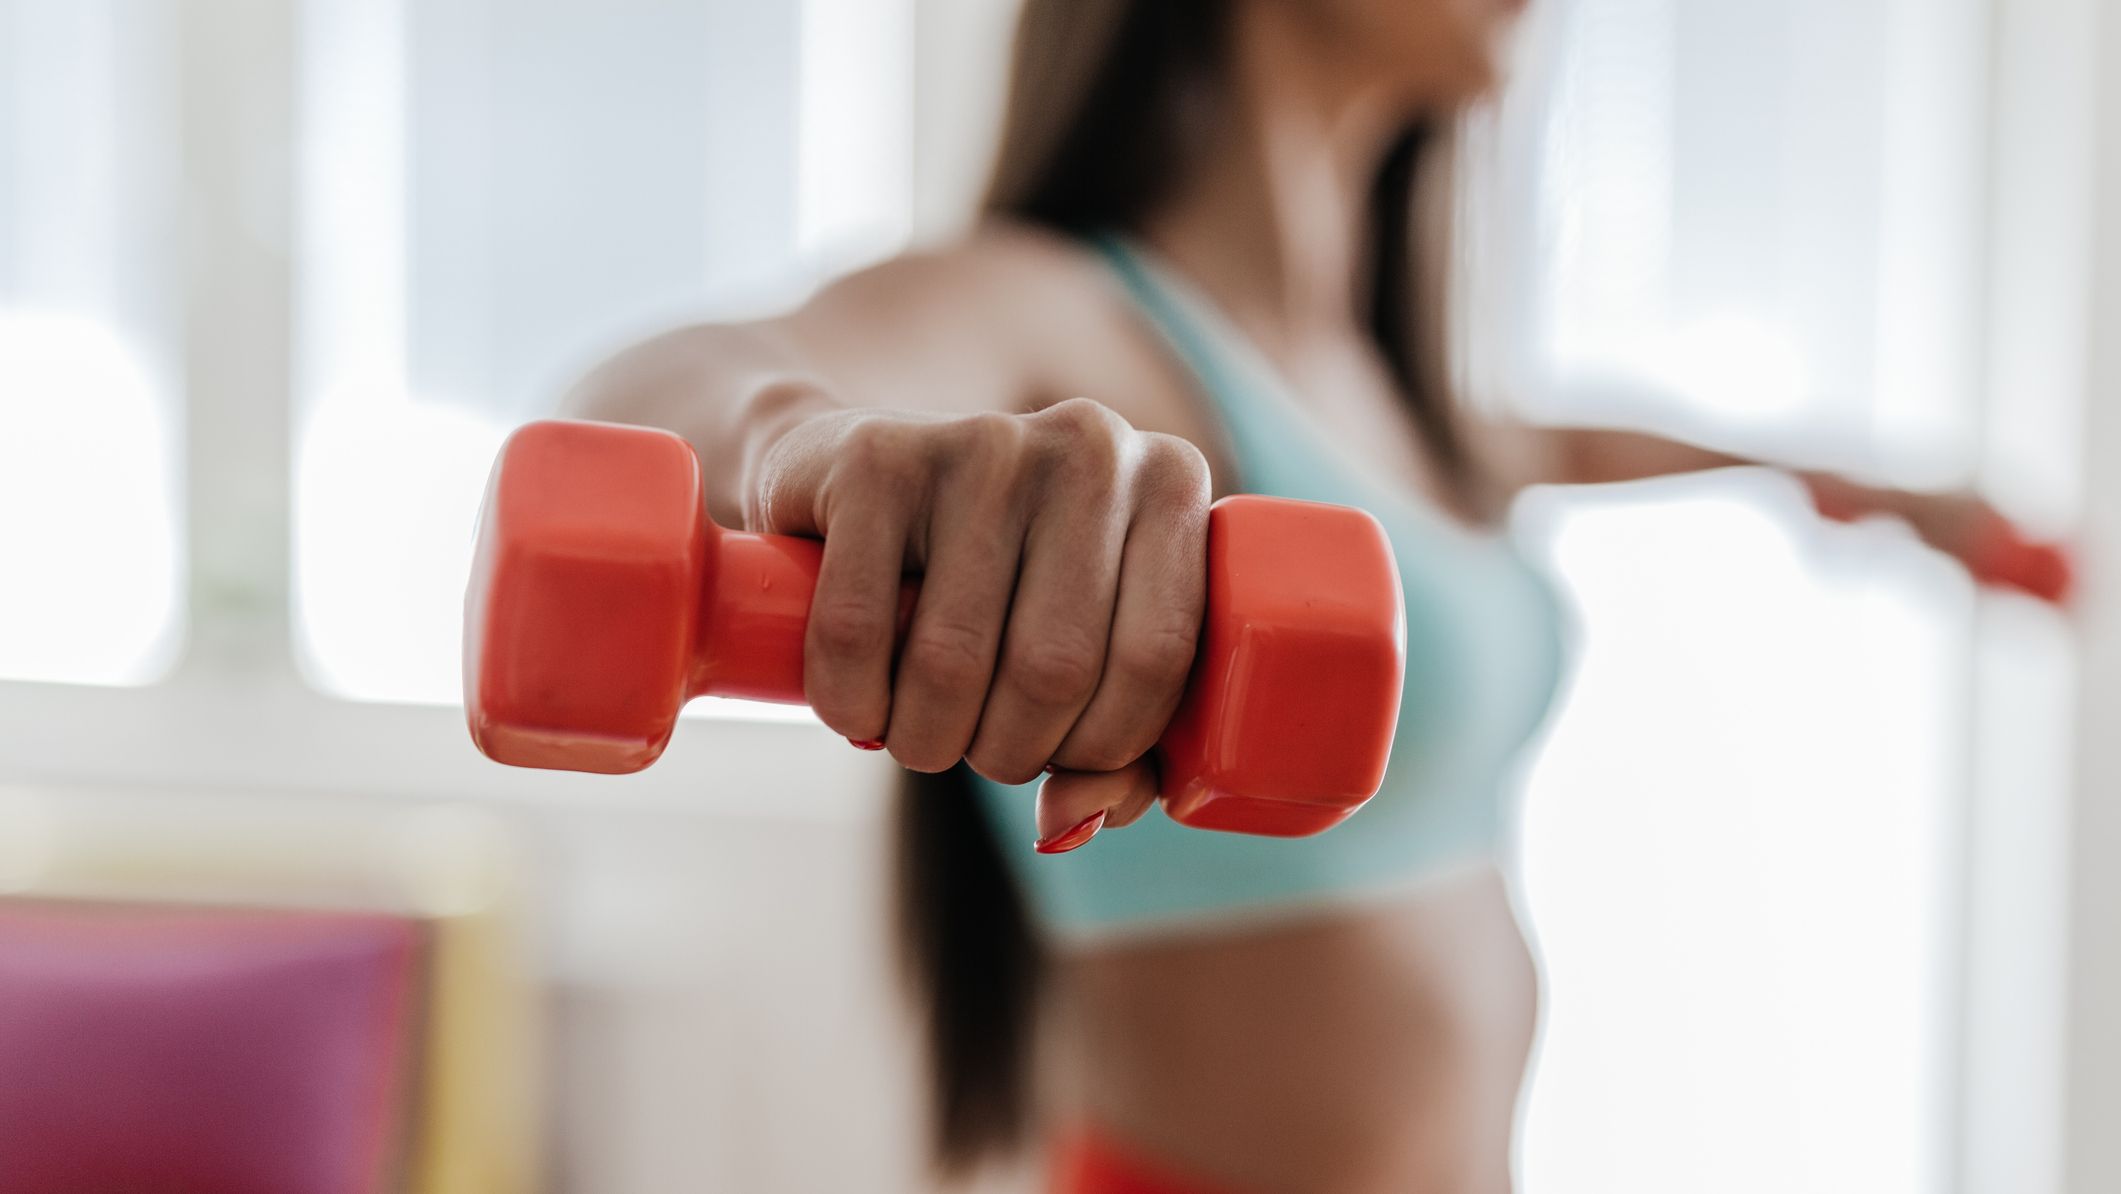 https://hips.hearstapps.com/hmg-prod/images/young-woman-exercising-with-her-weights-in-the-royalty-free-image-1697151024.jpg?crop=1xw:0.84415xh;center,top